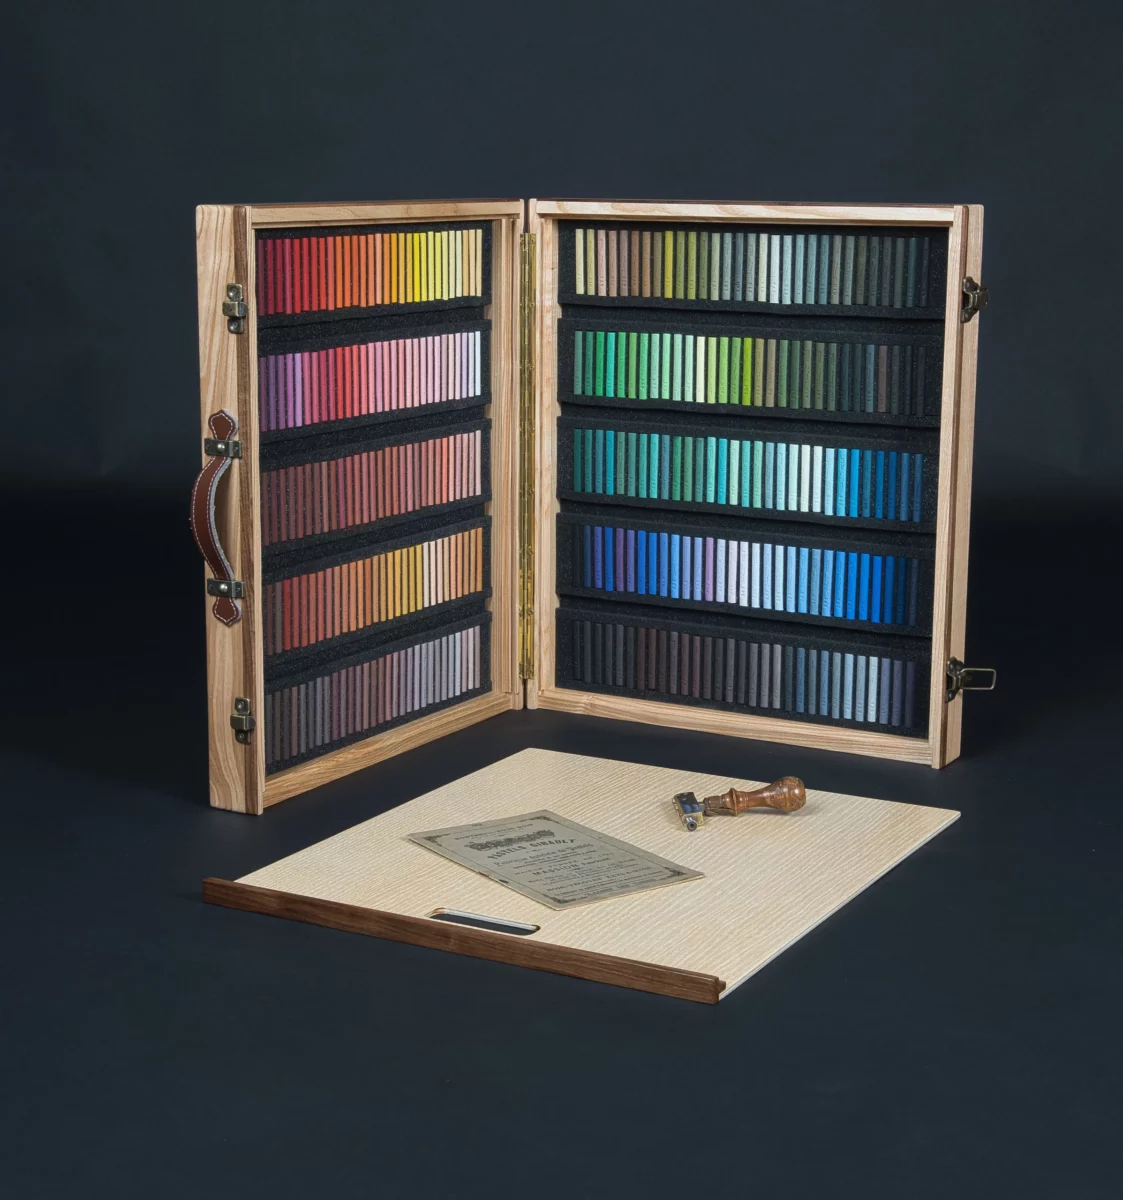 Compositions of 300 harmonized pastels in a wooden box.

"Harmony"